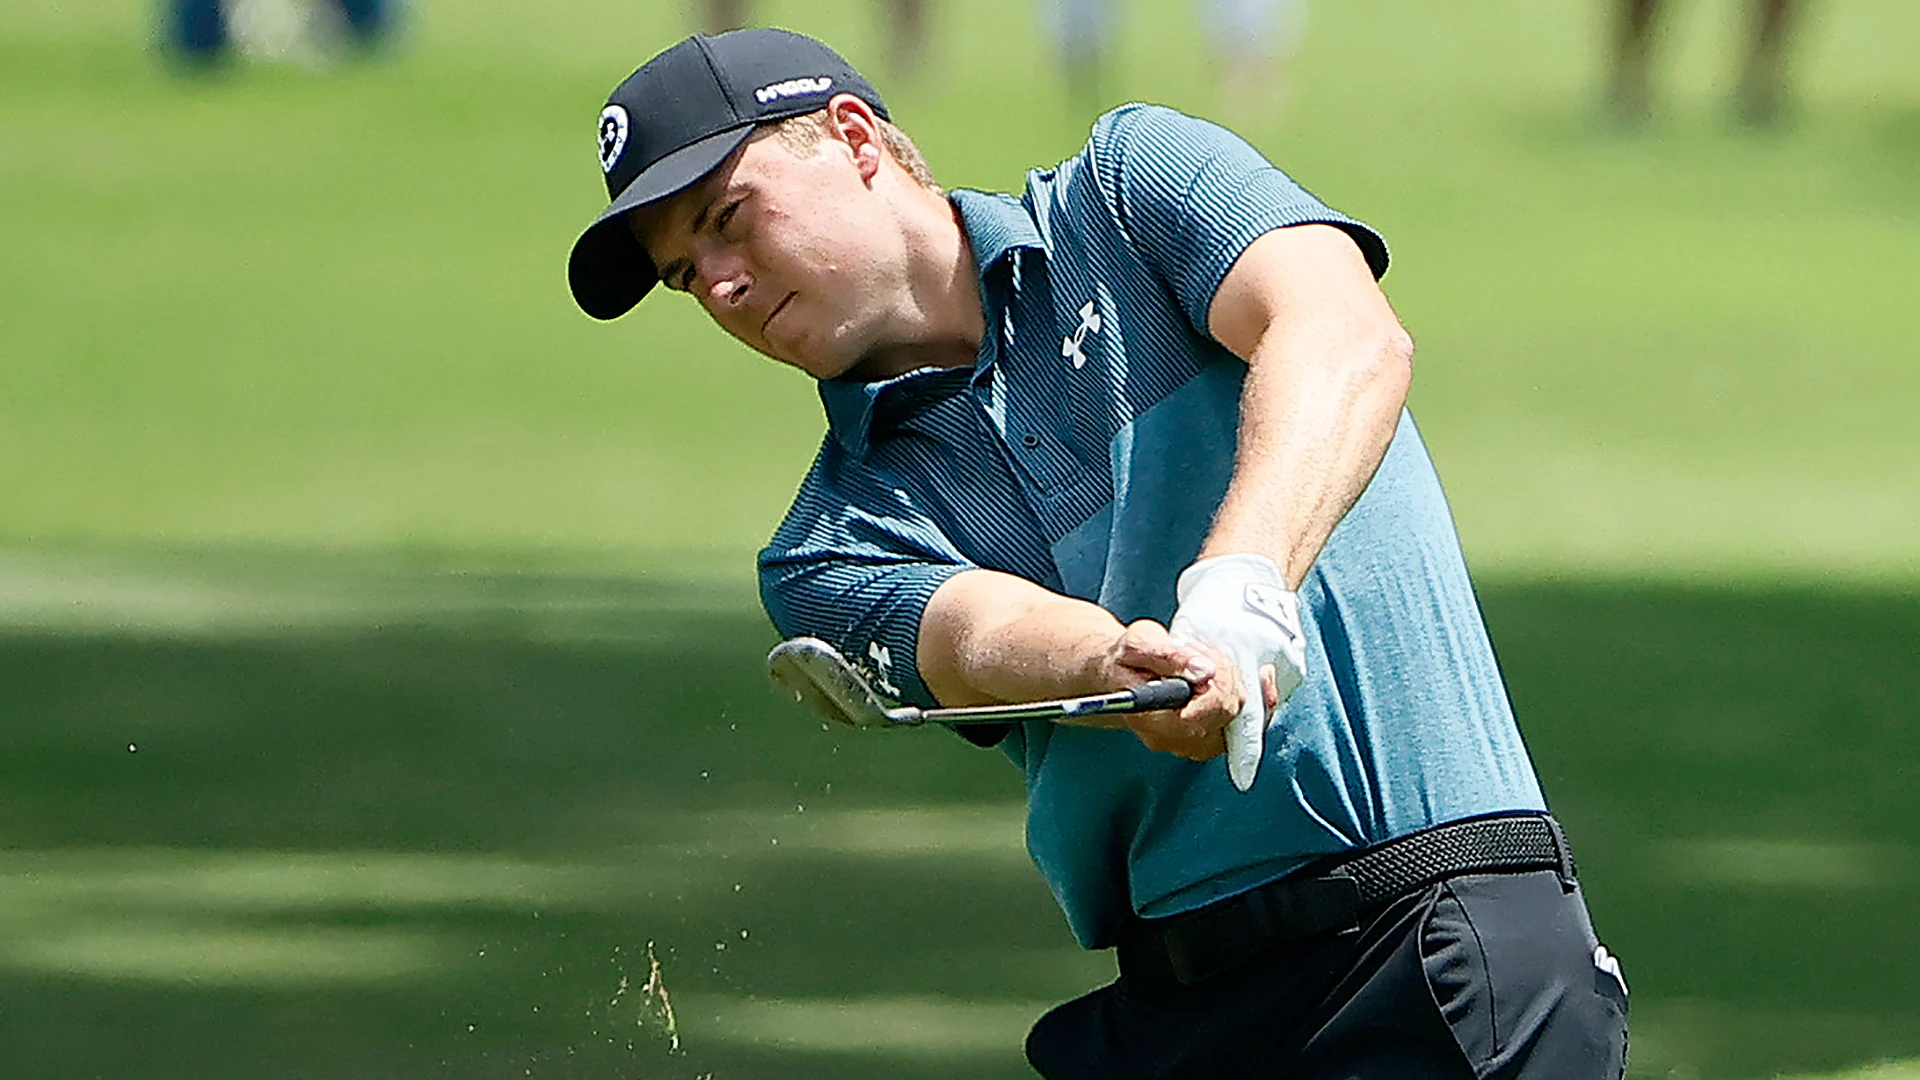 Jordan Spieth birdies the last to take one-shot lead into final round at Colonial